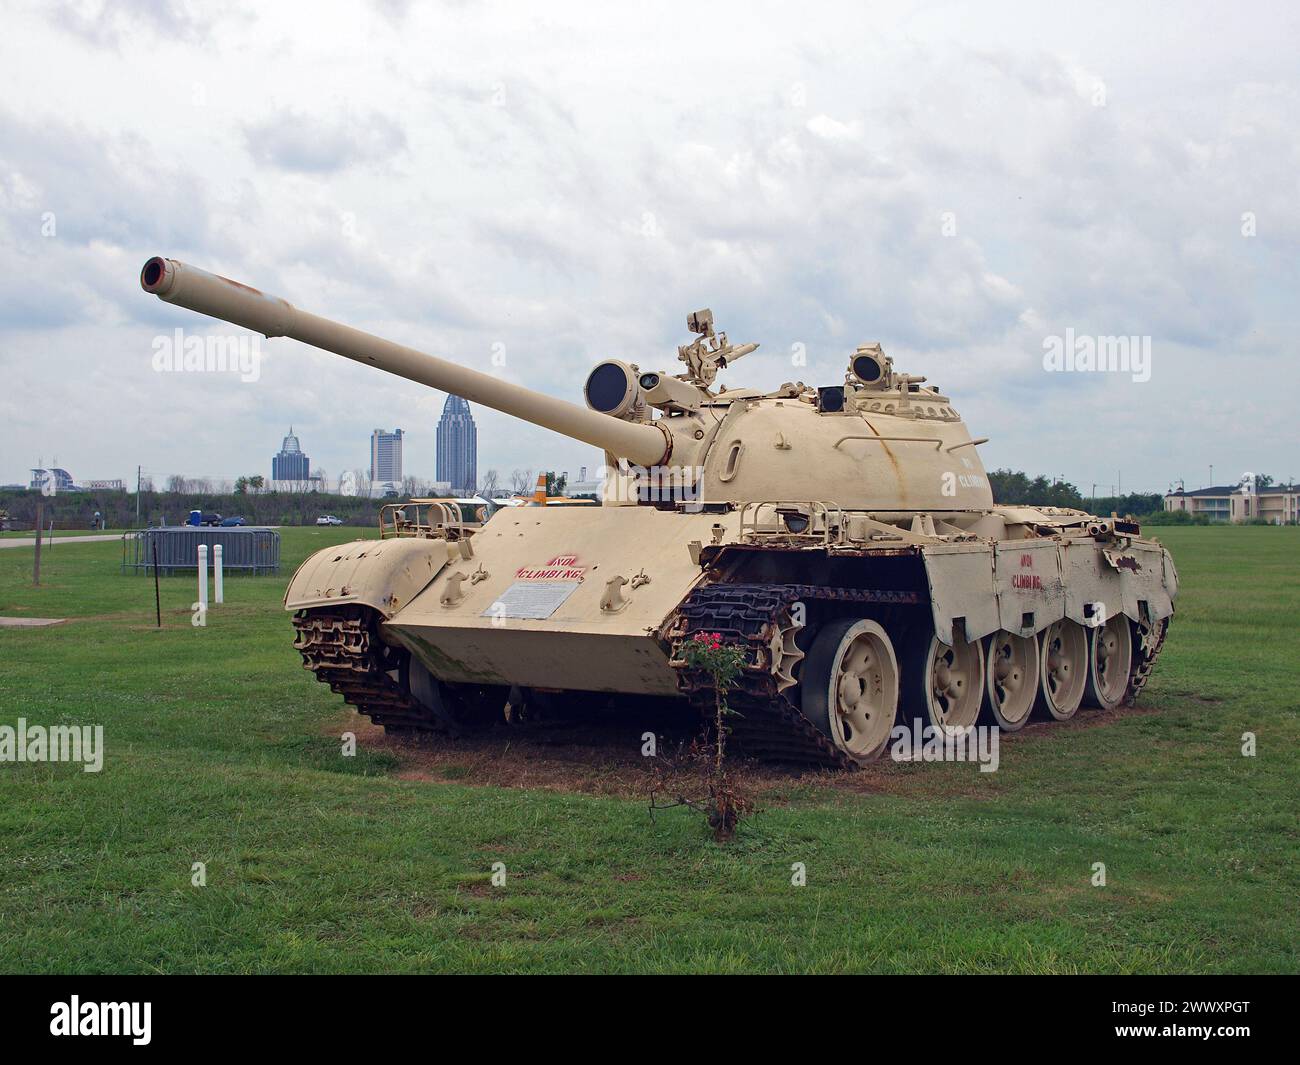 Mobile, Alabama, United States - August 11, 2012: Russian battle tank captured by American troops during the war in Iraq. Stock Photo